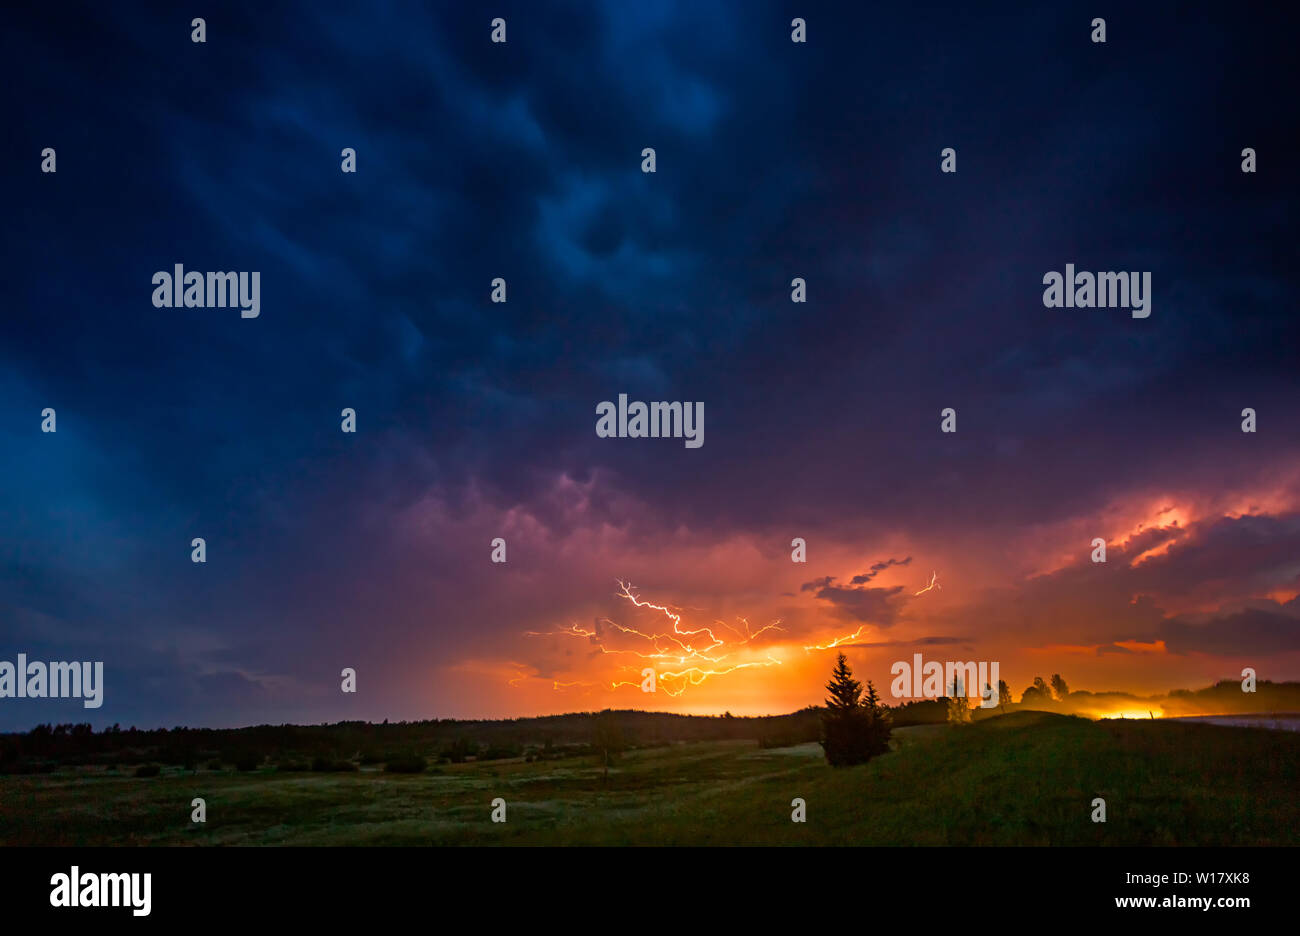 Close Up With Lightning With Dramatic Clouds Composite Image Night Thunder Storm Stock Photo Alamy